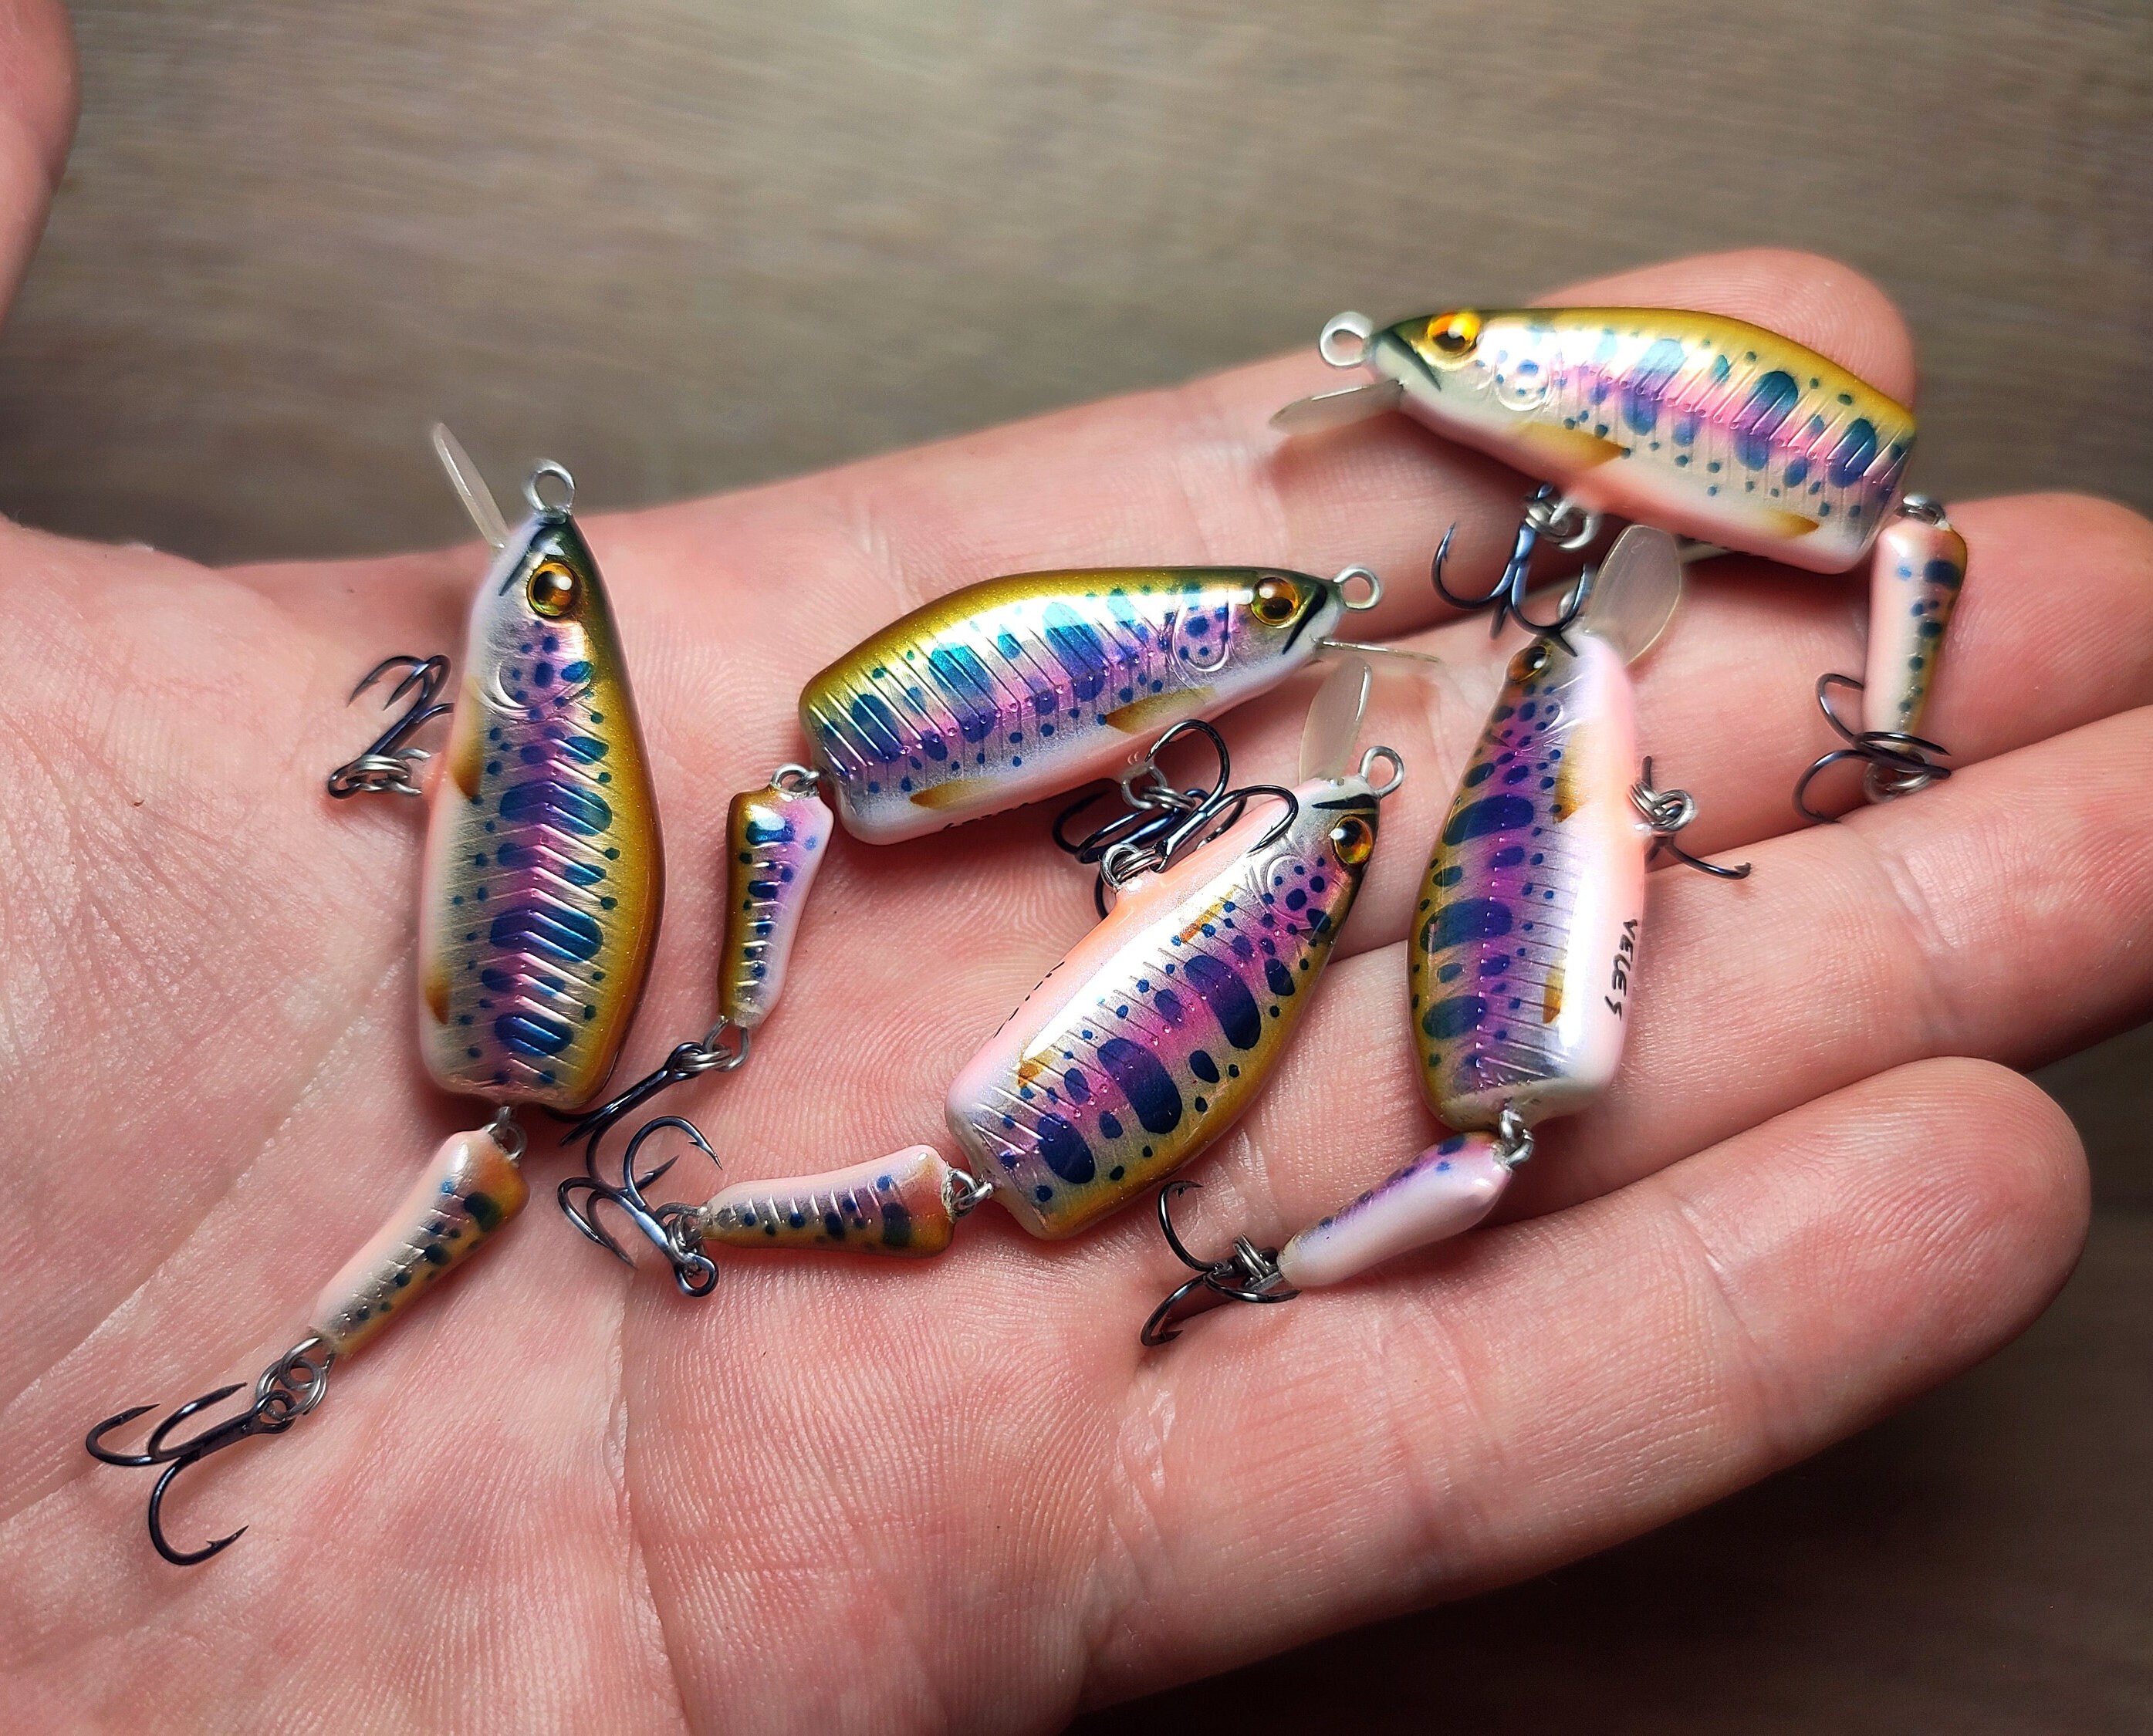 Swapping some of my trout lures over to single hooks